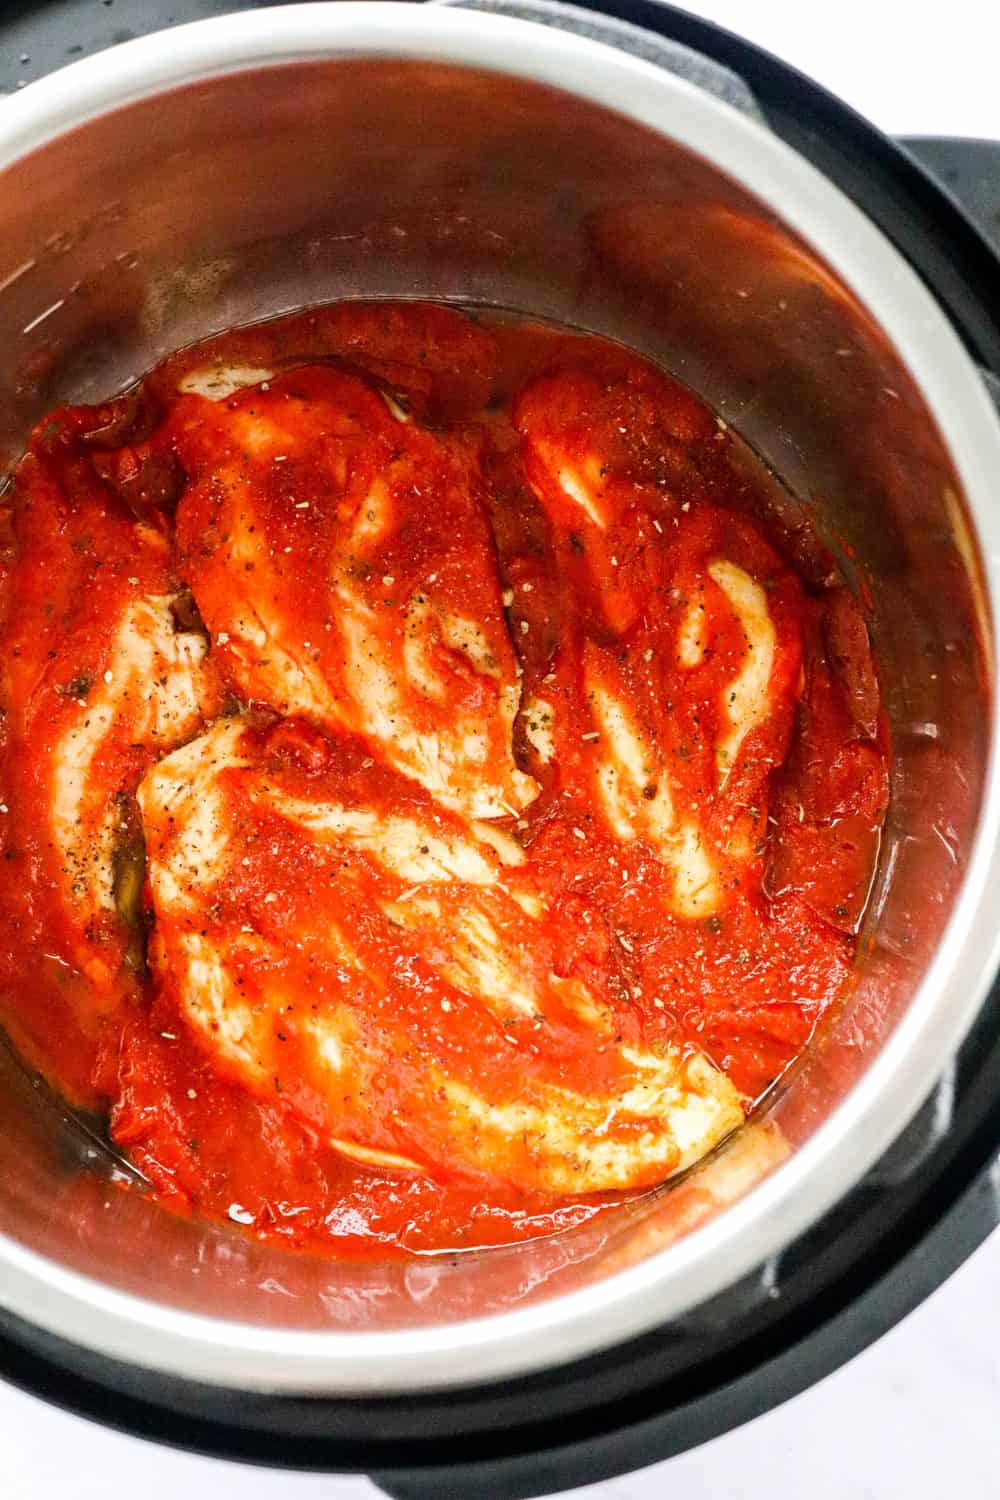 Cooked chicken over tomato sauce in an Instant Pot